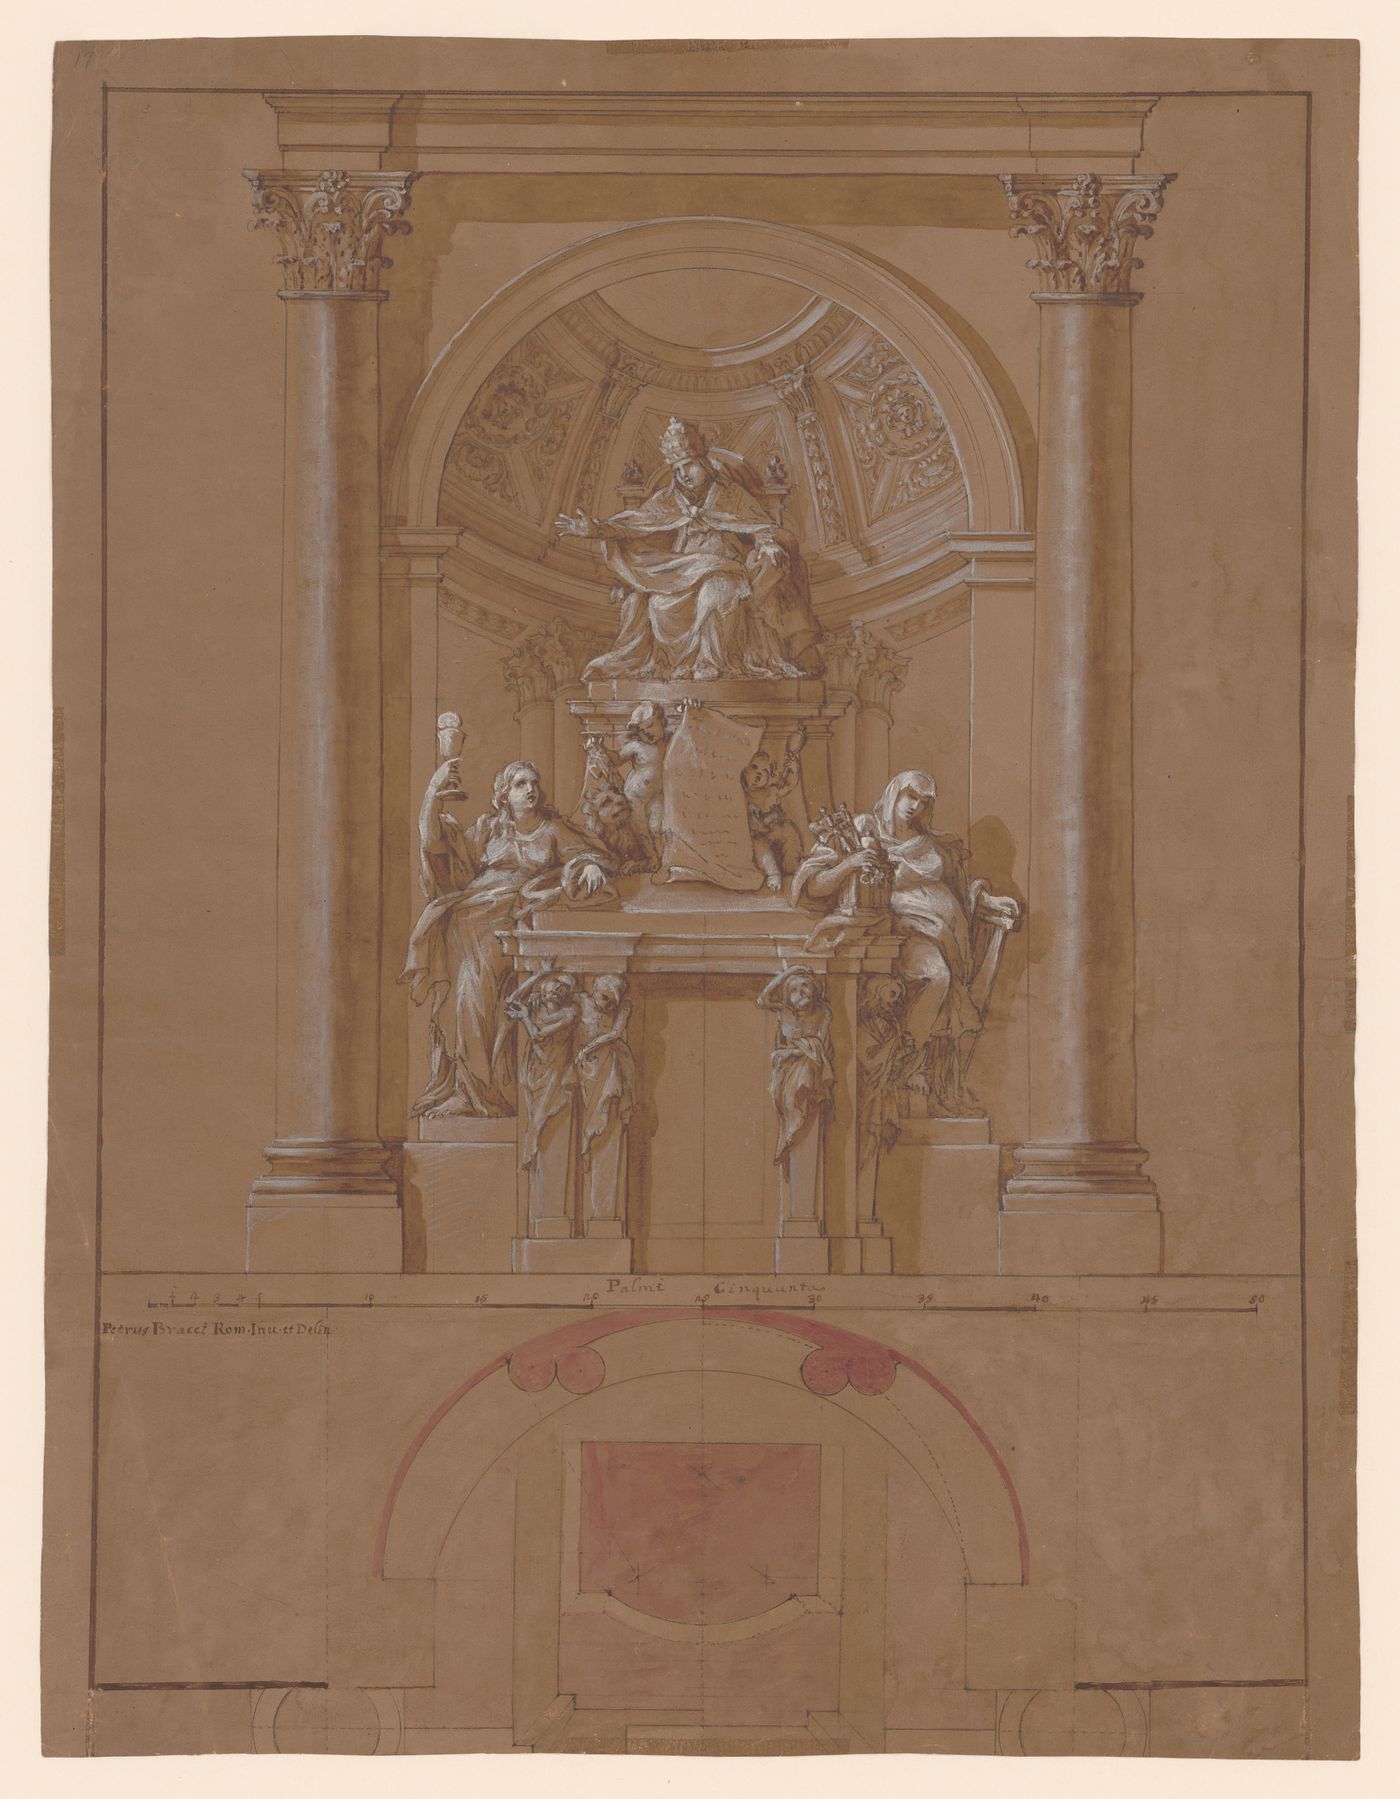 Elevation and plan, possibly for the tomb of Benedict XIV, Rome